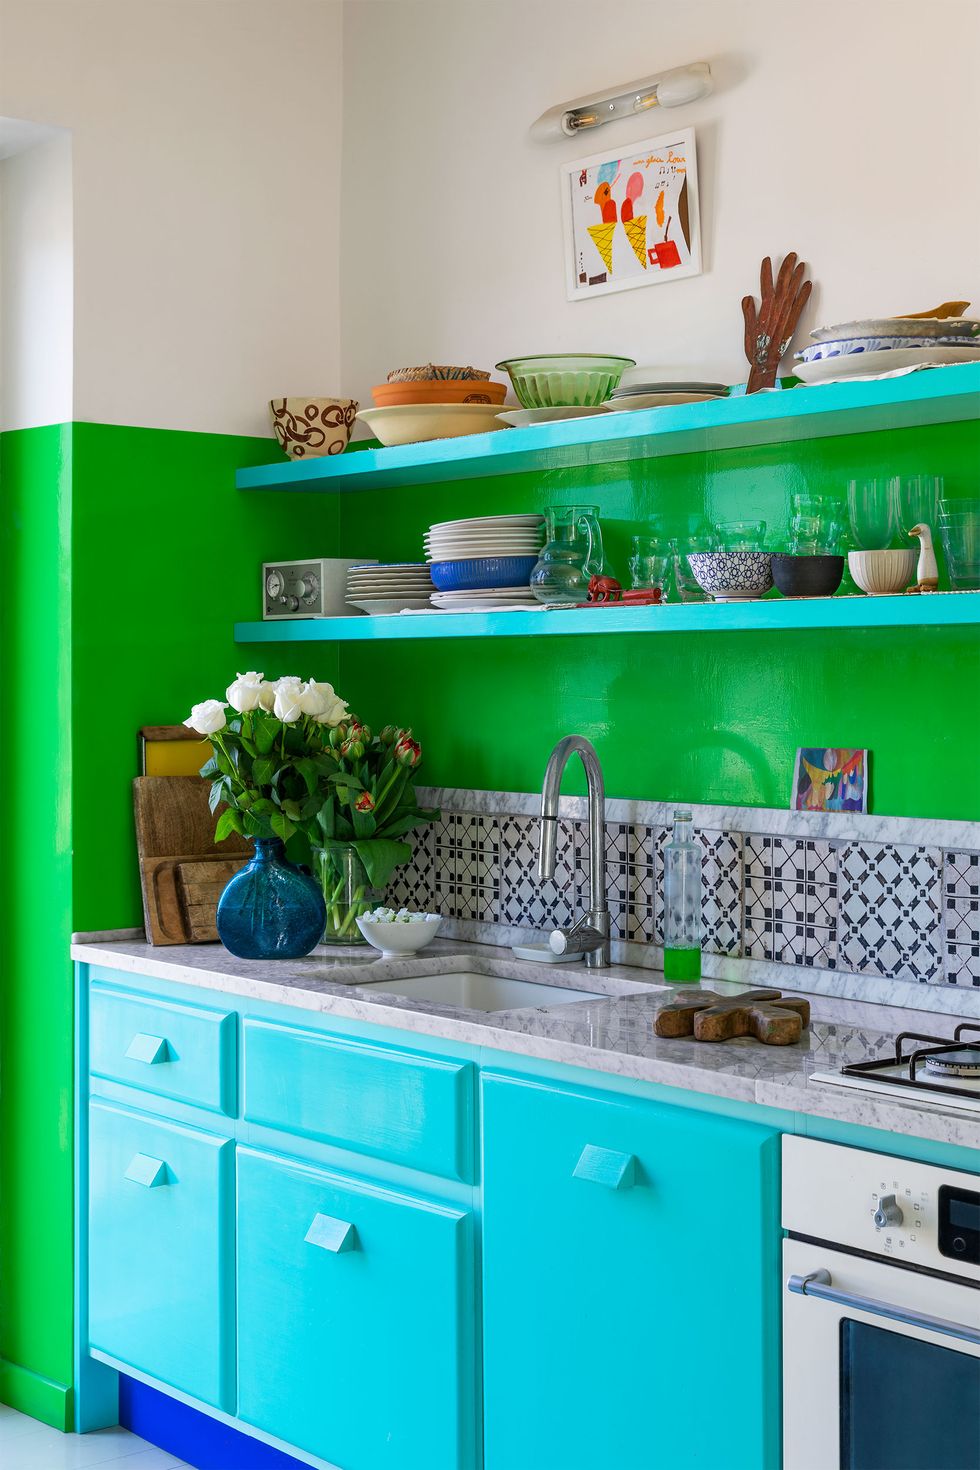 a kitchen with half white and half bright green walls, bright aqua cabinets with a deep blue toe kick, oven, marble counter with sink and range, tiled backsplash open green shelves with dishes, small artwork above